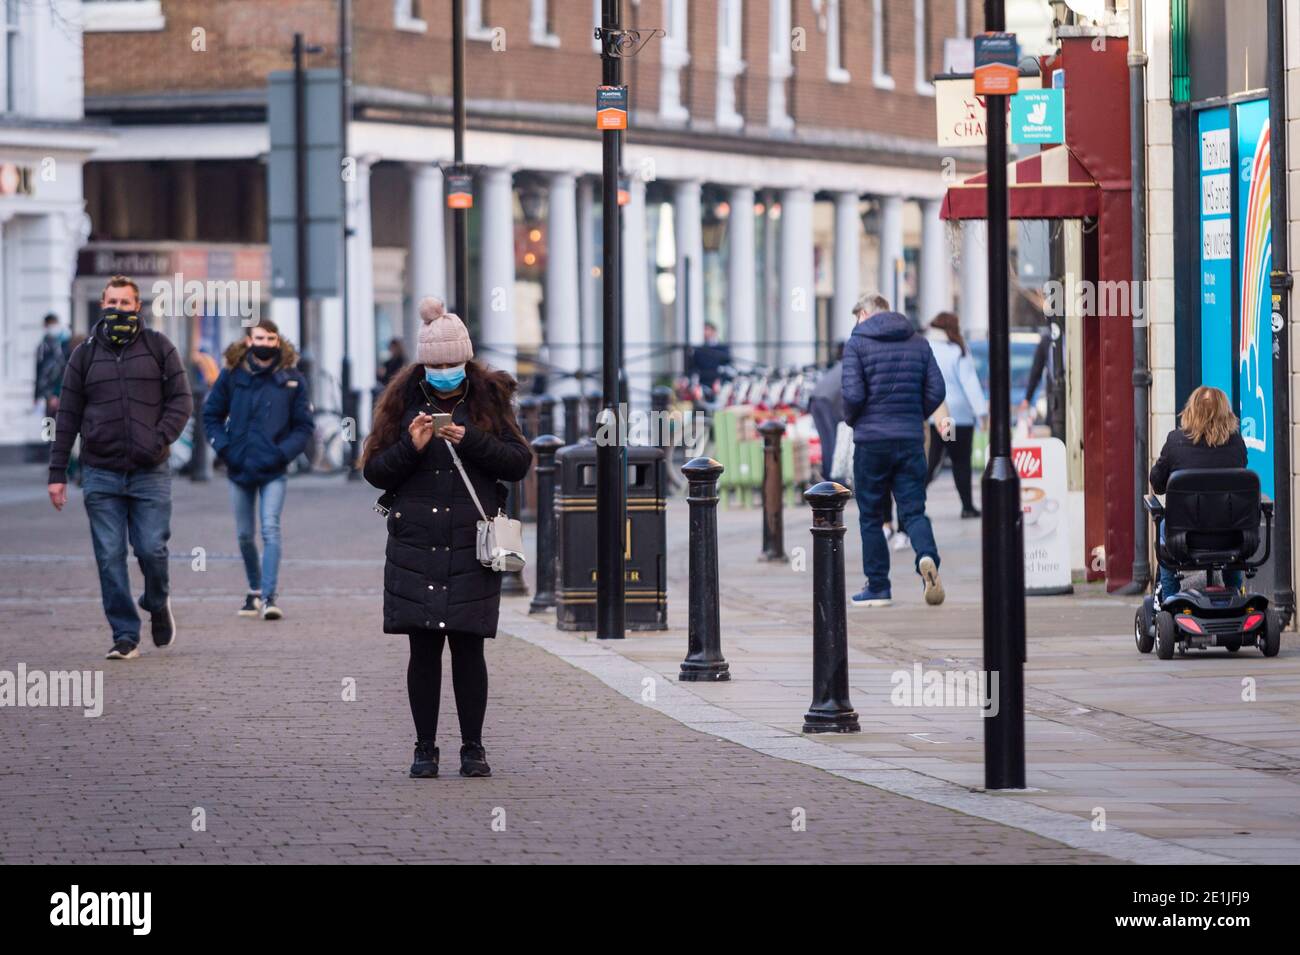 Uxbridge, UK.  7 January 2021. People in the high street in Uxbridge, north west London, on the morning that the third national lockdown came in to effect.  The UK government has imposed tougher restrictions in an effort to combat a recently discovered variant strain as the number of Covid-19 related deaths and coronavirus cases continues to increase.  Boris Johnson, Prime Minister, is MP for the constituency of Uxbridge and South Ruislip.  Credit: Stephen Chung / Alamy Live News Stock Photo